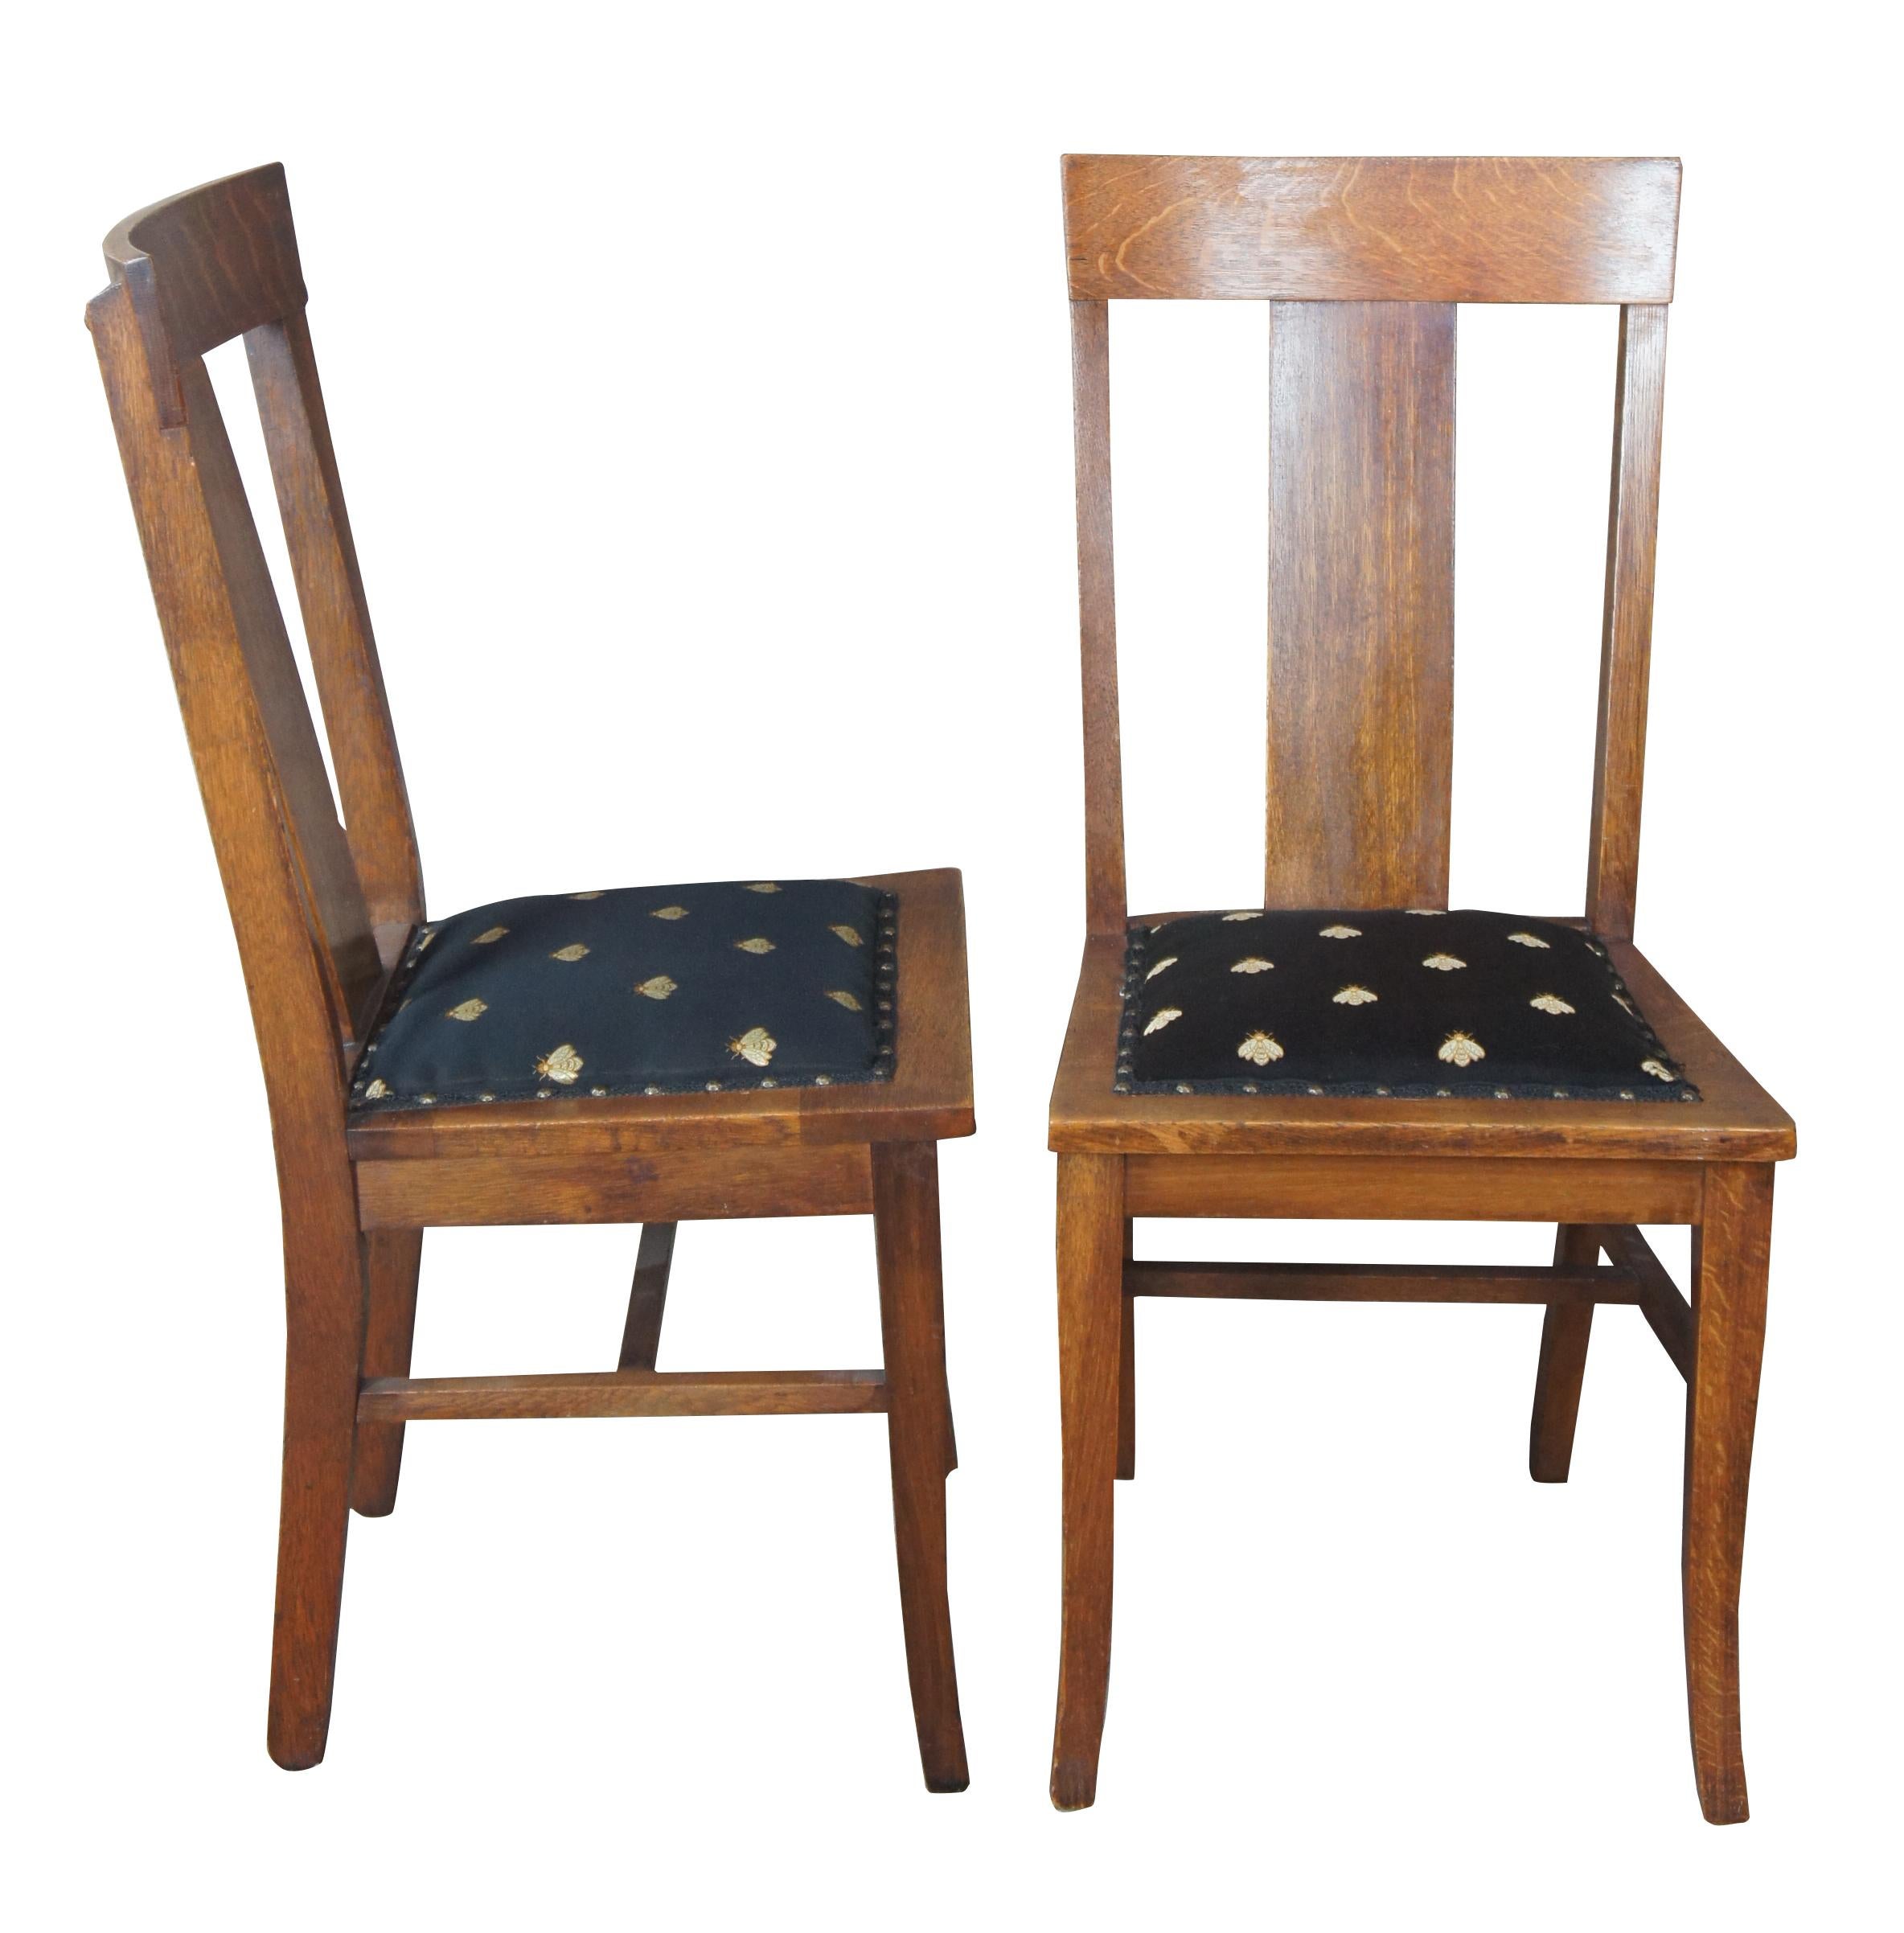 Six late Victorian dining chairs by National Furniture Company, circa 1900s. Made from oak with a quartersawn backing leading to insect (bee) pattern cushioned seats with nailhead trim. National Furniture Company was based out of Jamestown, New York